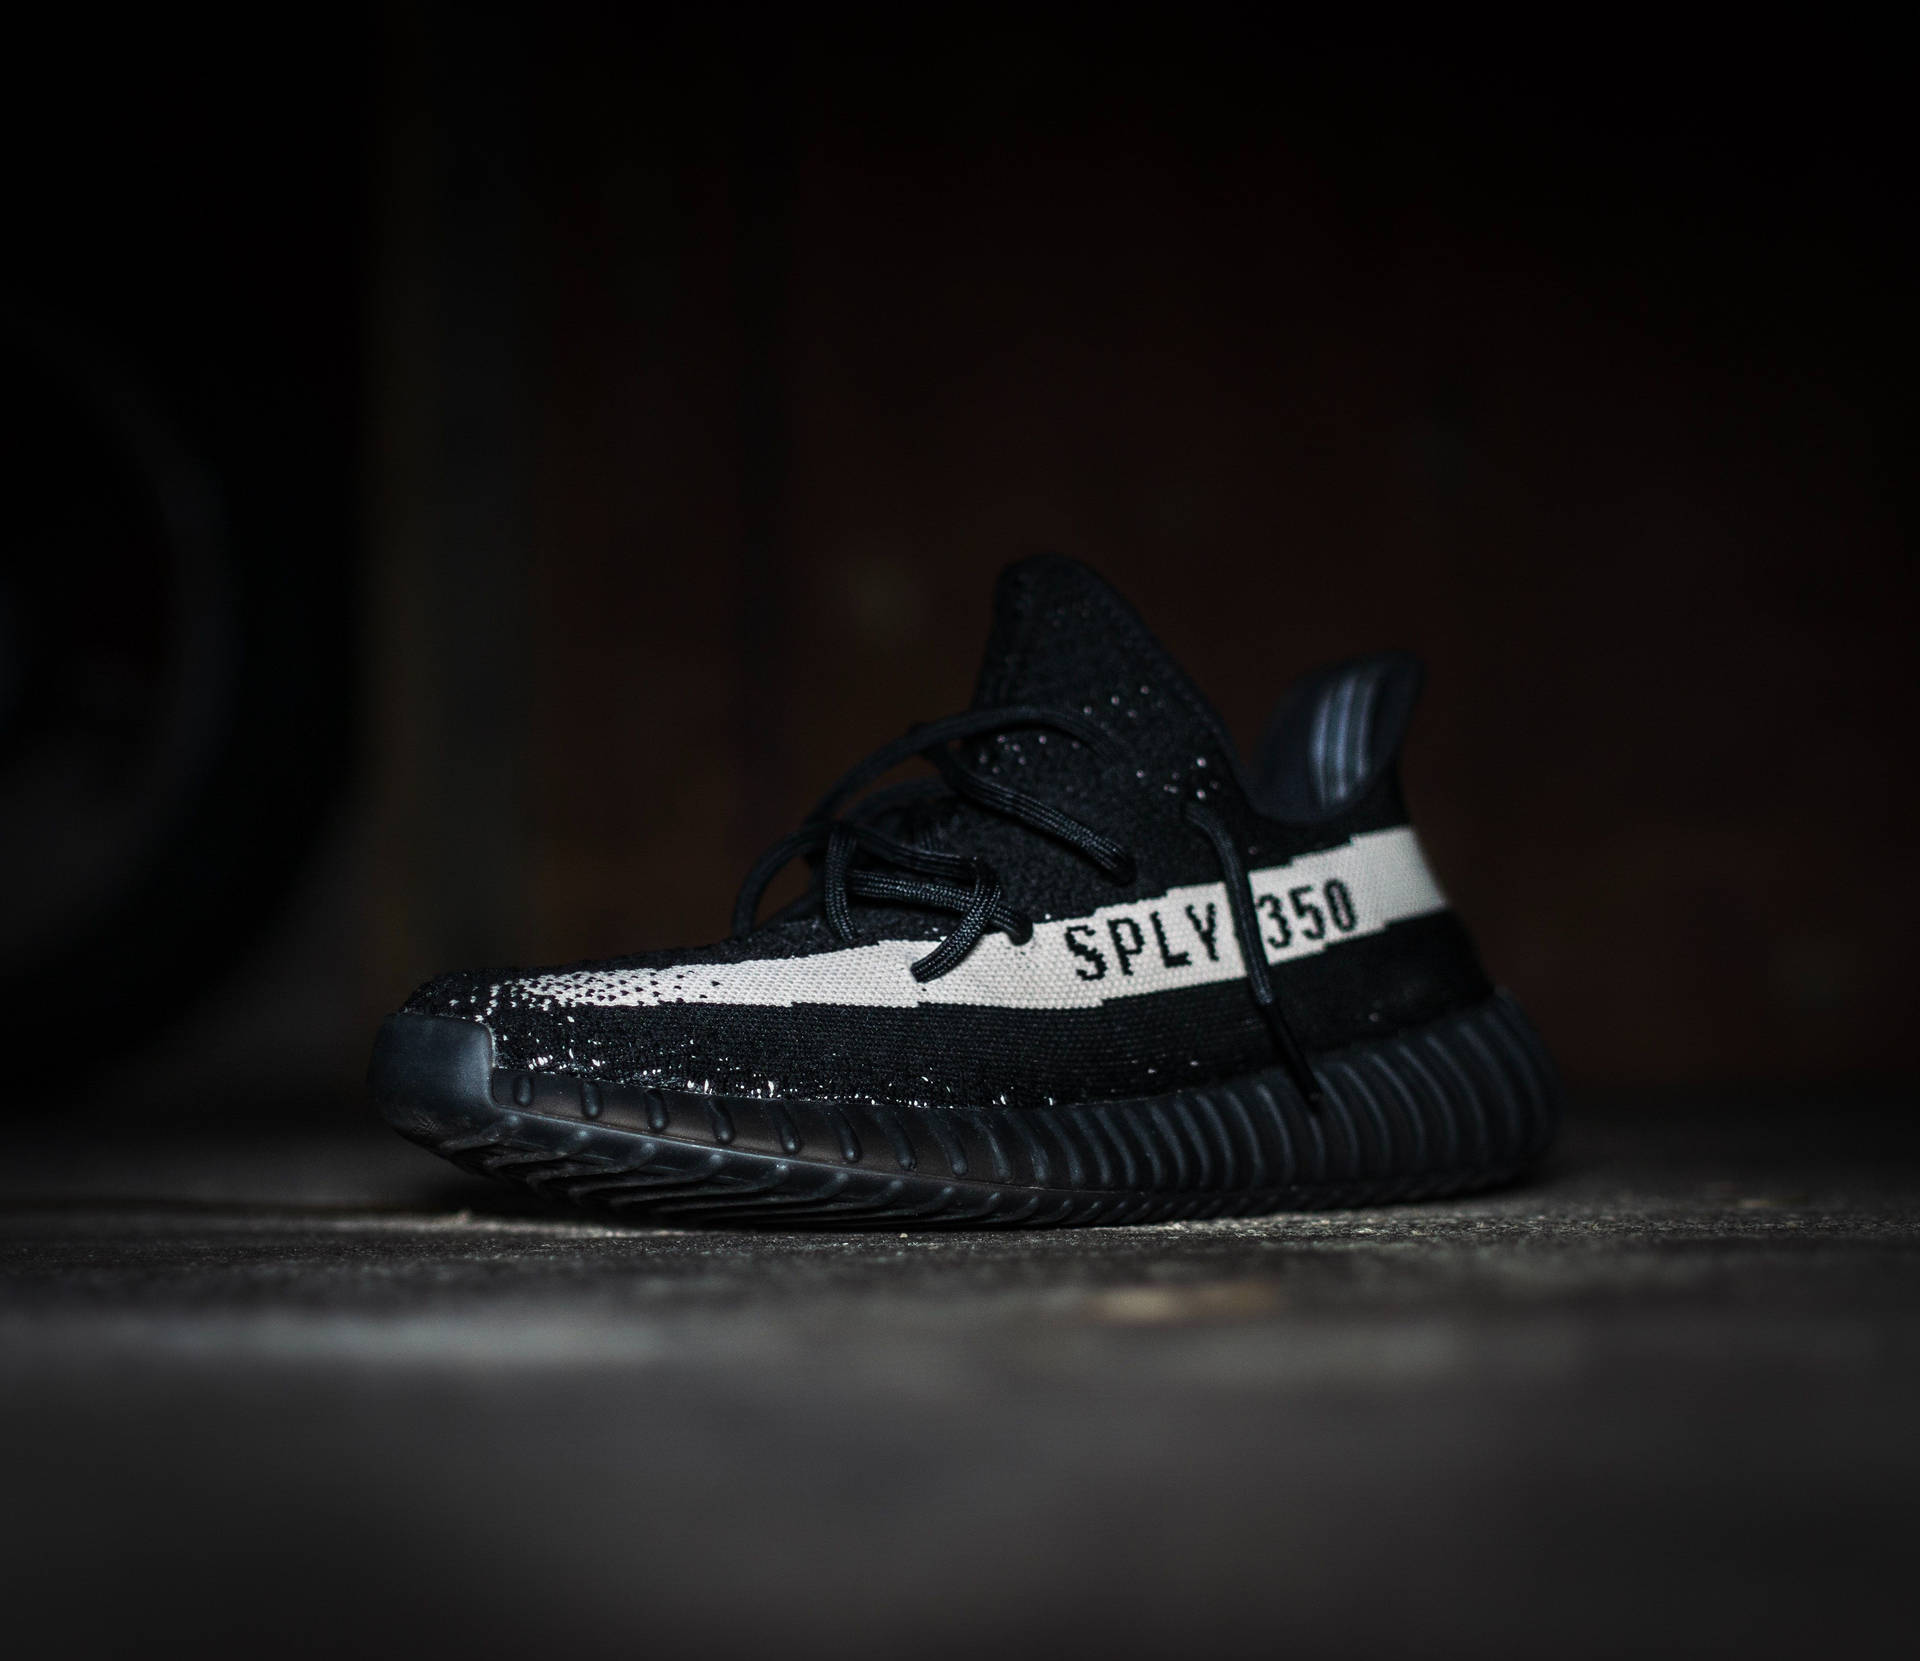 Sneaker Yeezy Boost 350 Black And White Background